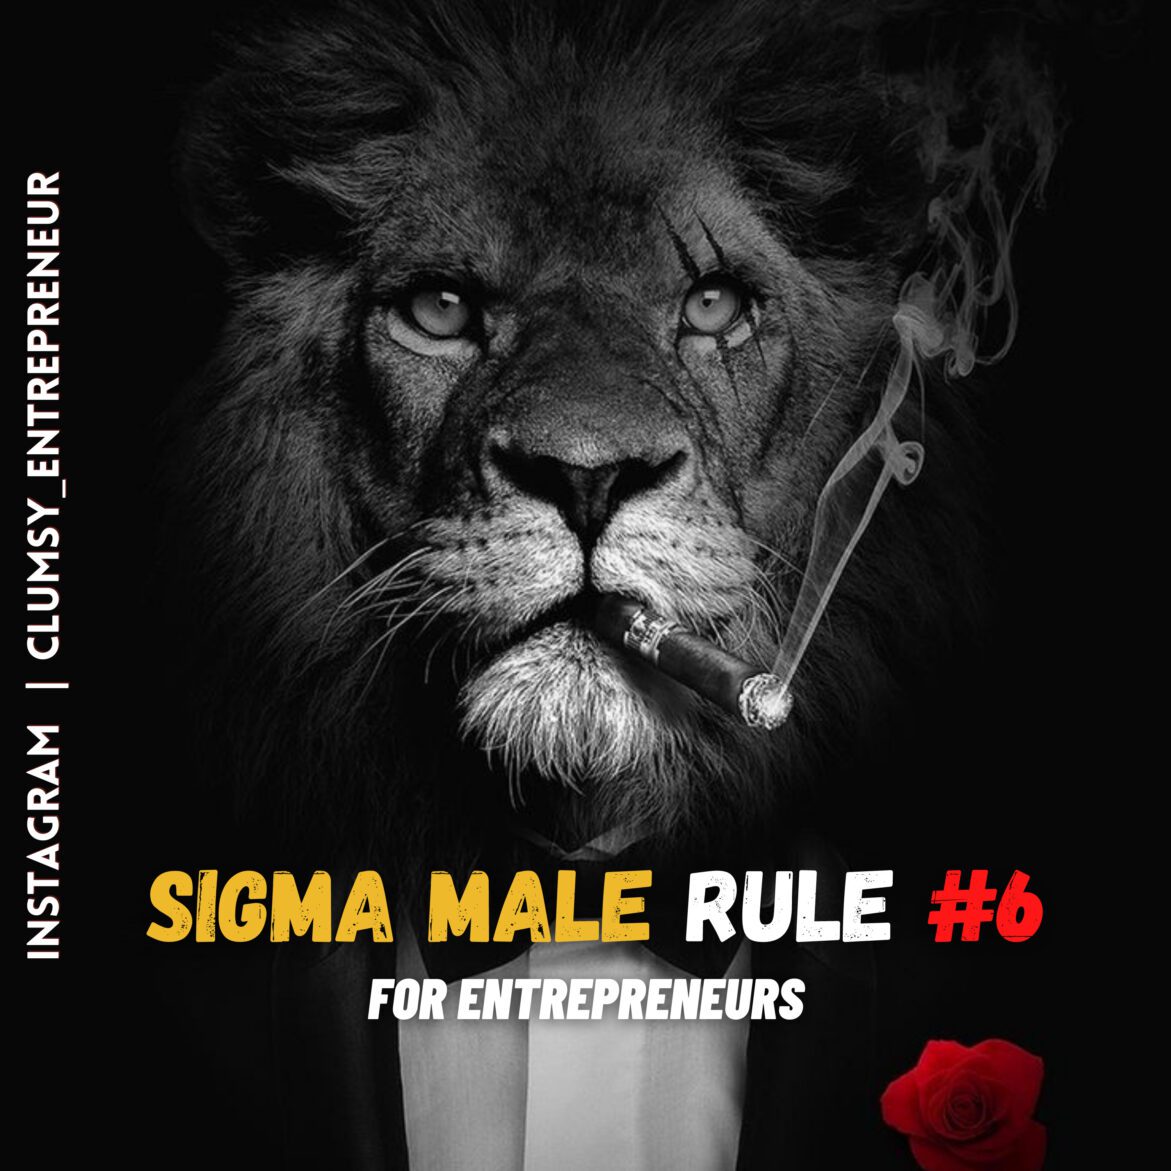 Black Podcasting - Sigma Male Rule No.6, Entrepreneur Rule No.6, Billionaires Rule No.6, Entrepreneur Life Rules, Sigma Male Rules, Motivational Speech, Life of an Entreprener, "I CAN DIE SINGLE BUT, I WILL NEVER.."